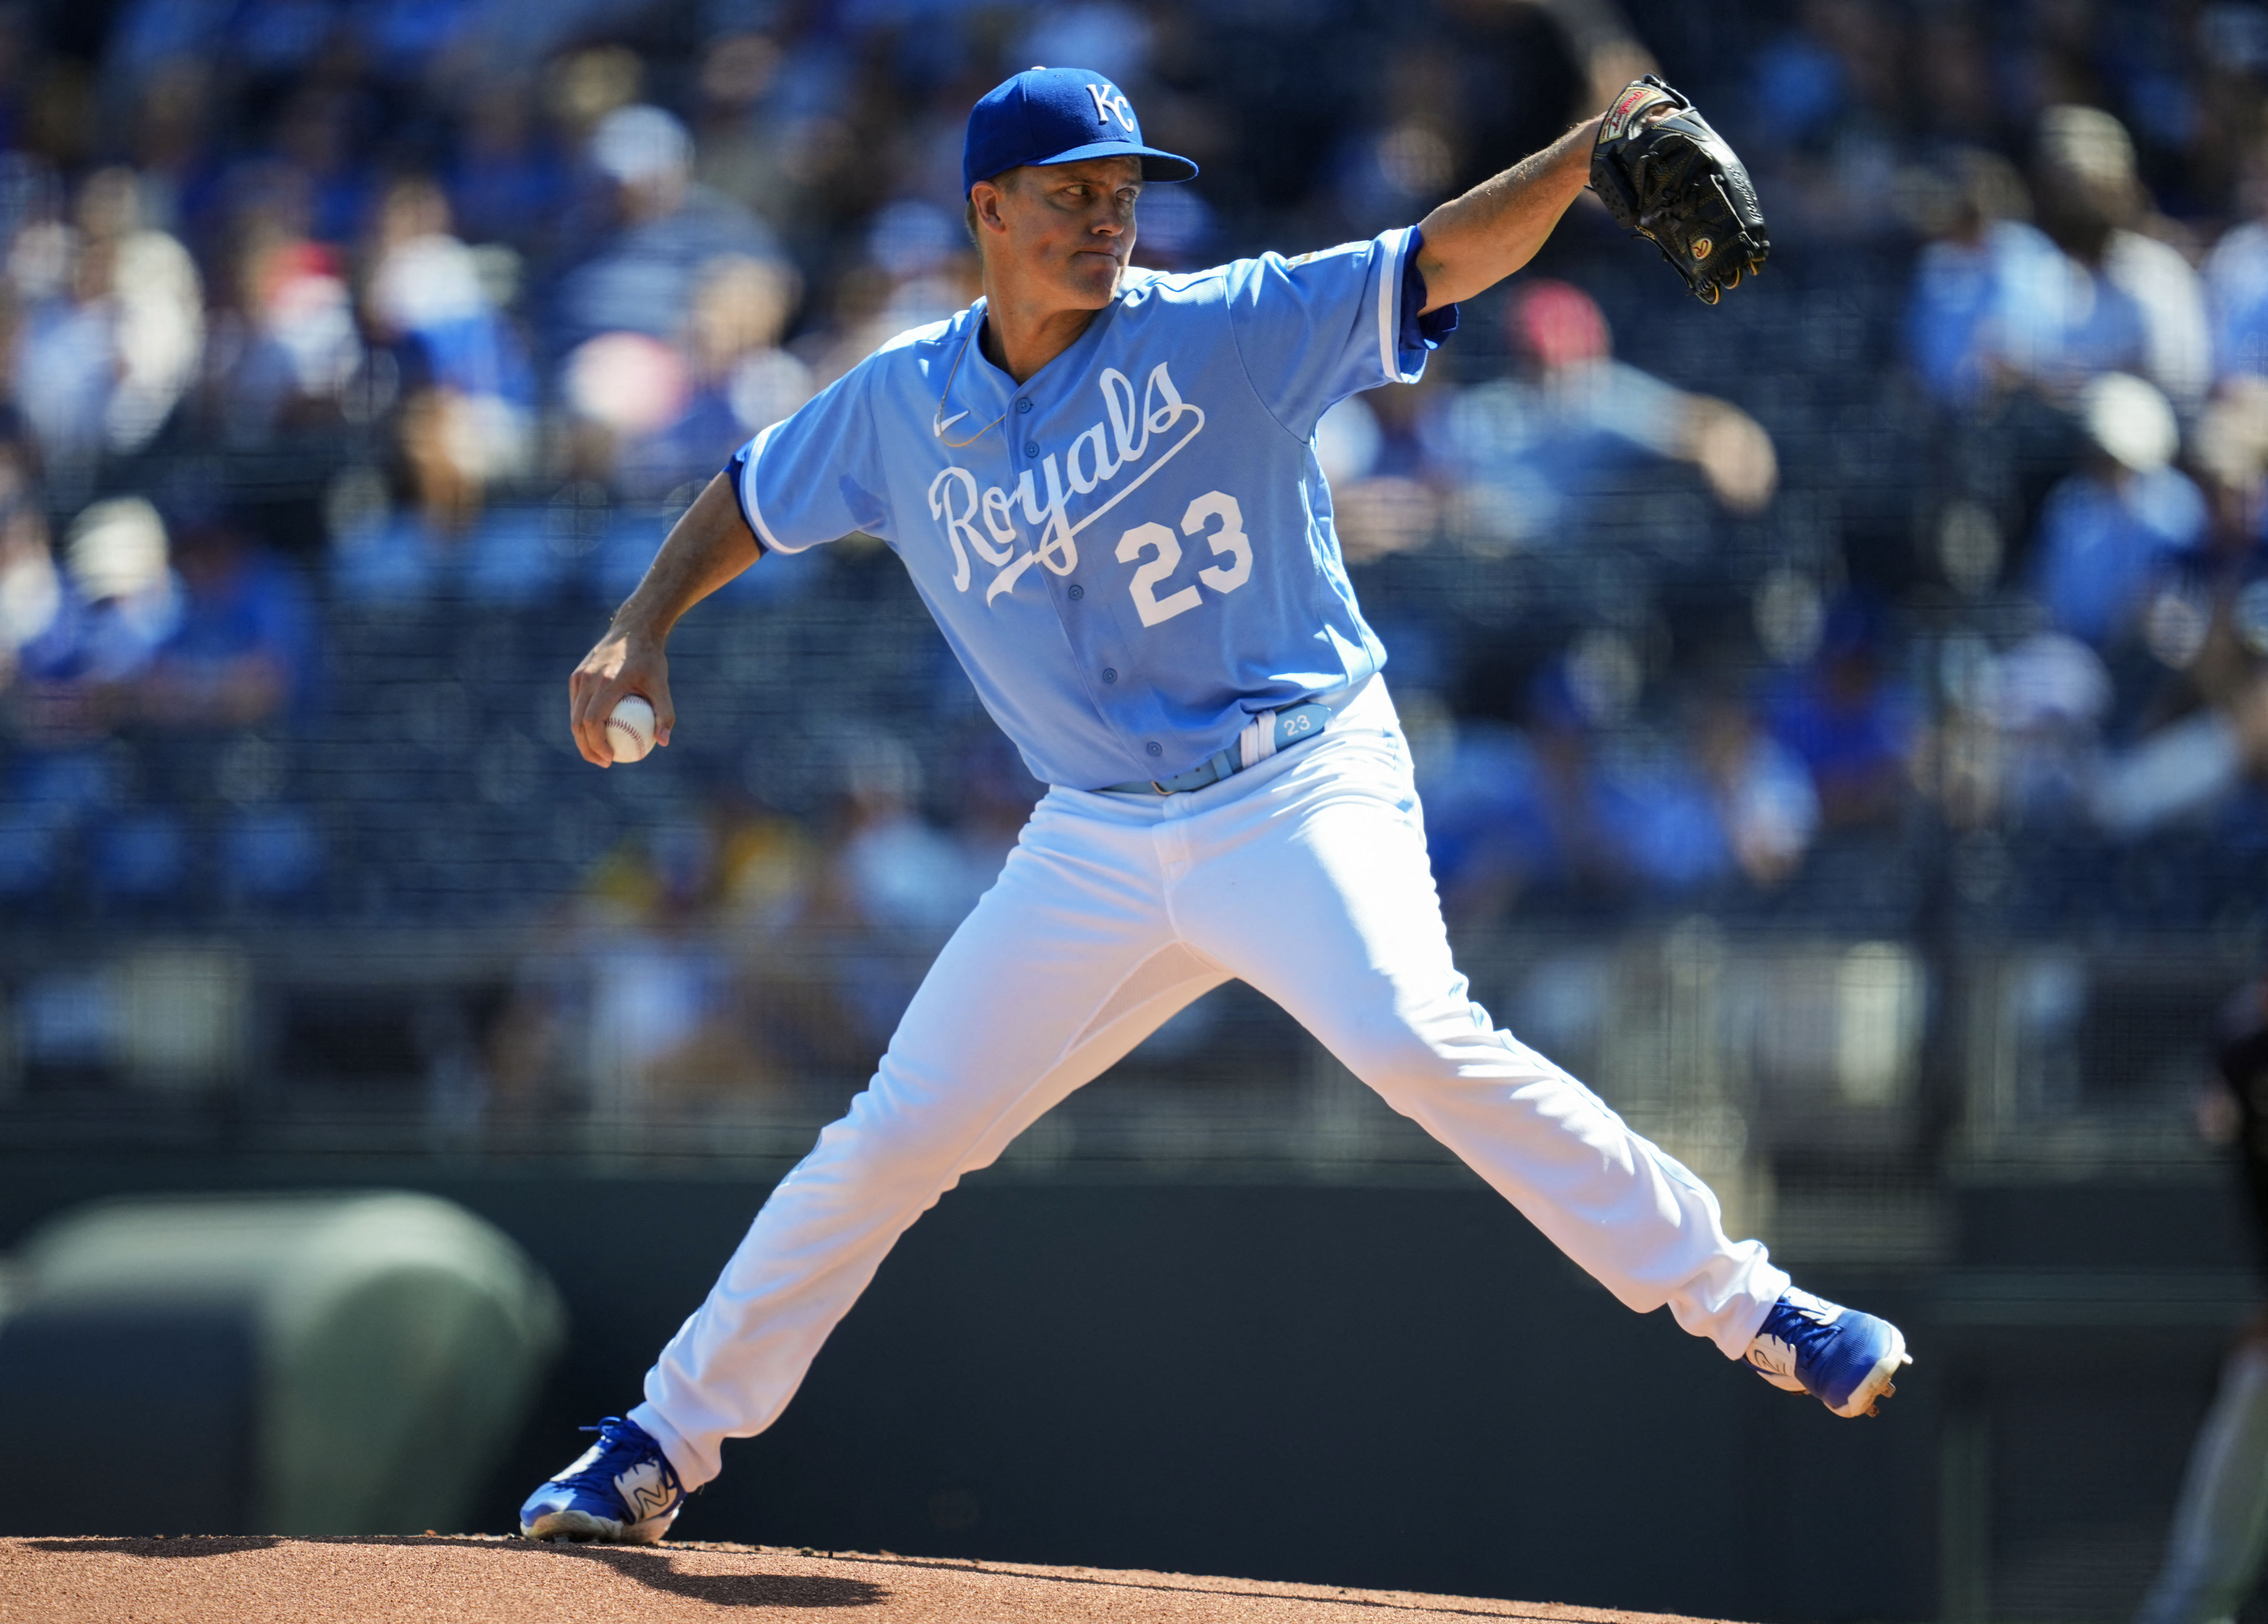 Kansas City Royals complete sweep of Clevland Guardians, 6-2